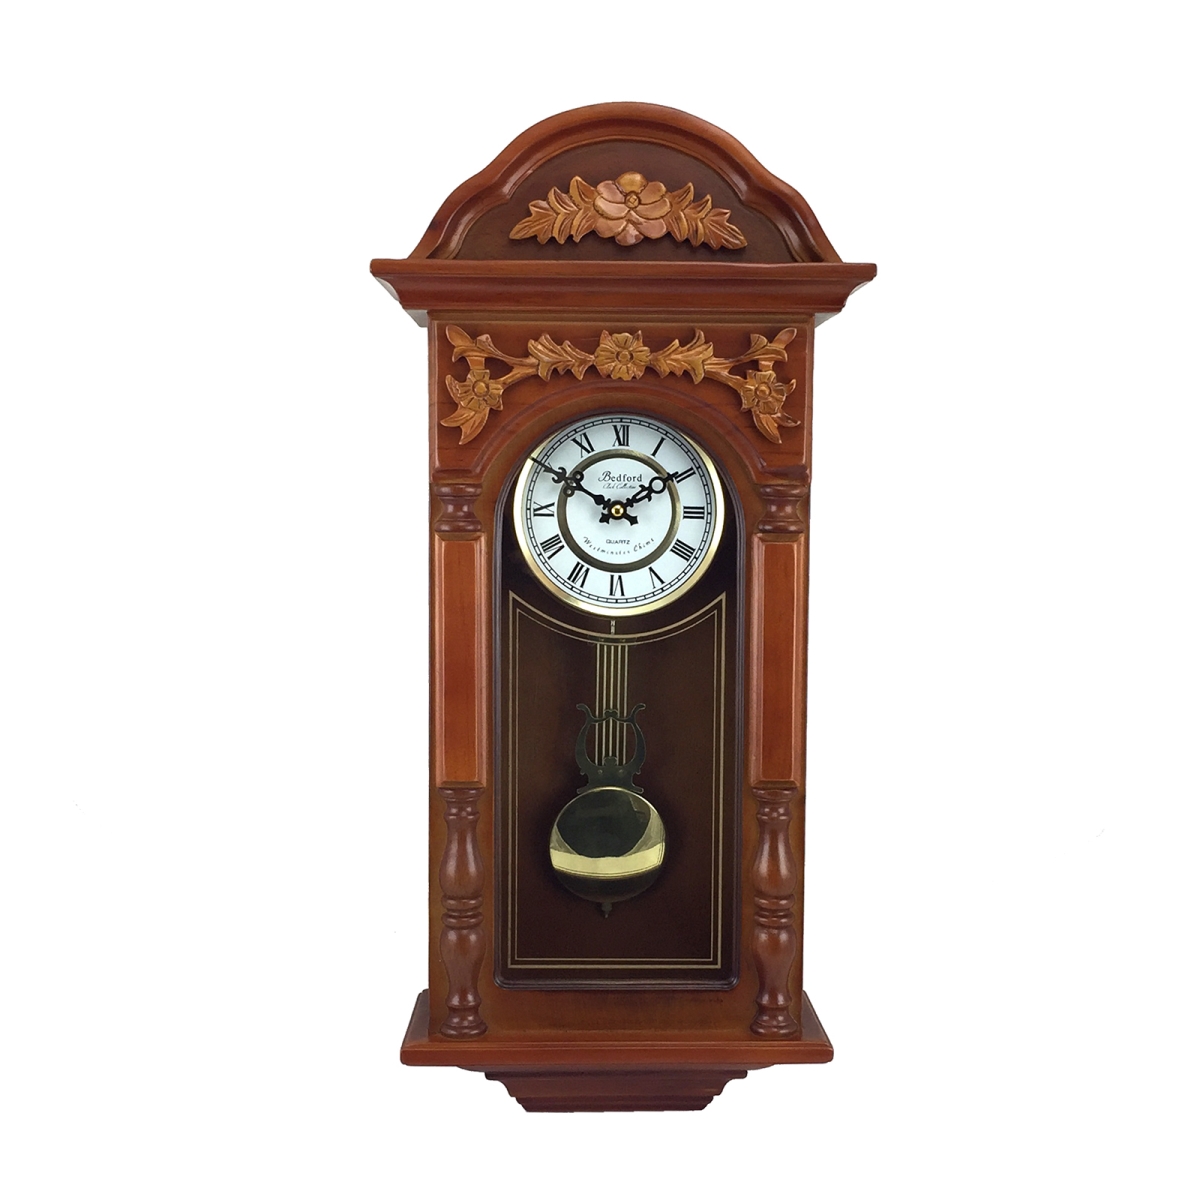 Picture of Bedford Clock Collection BED-9014 27.5 in. Antique Chiming Wall Clock with Roman Numerals, Oak Finish